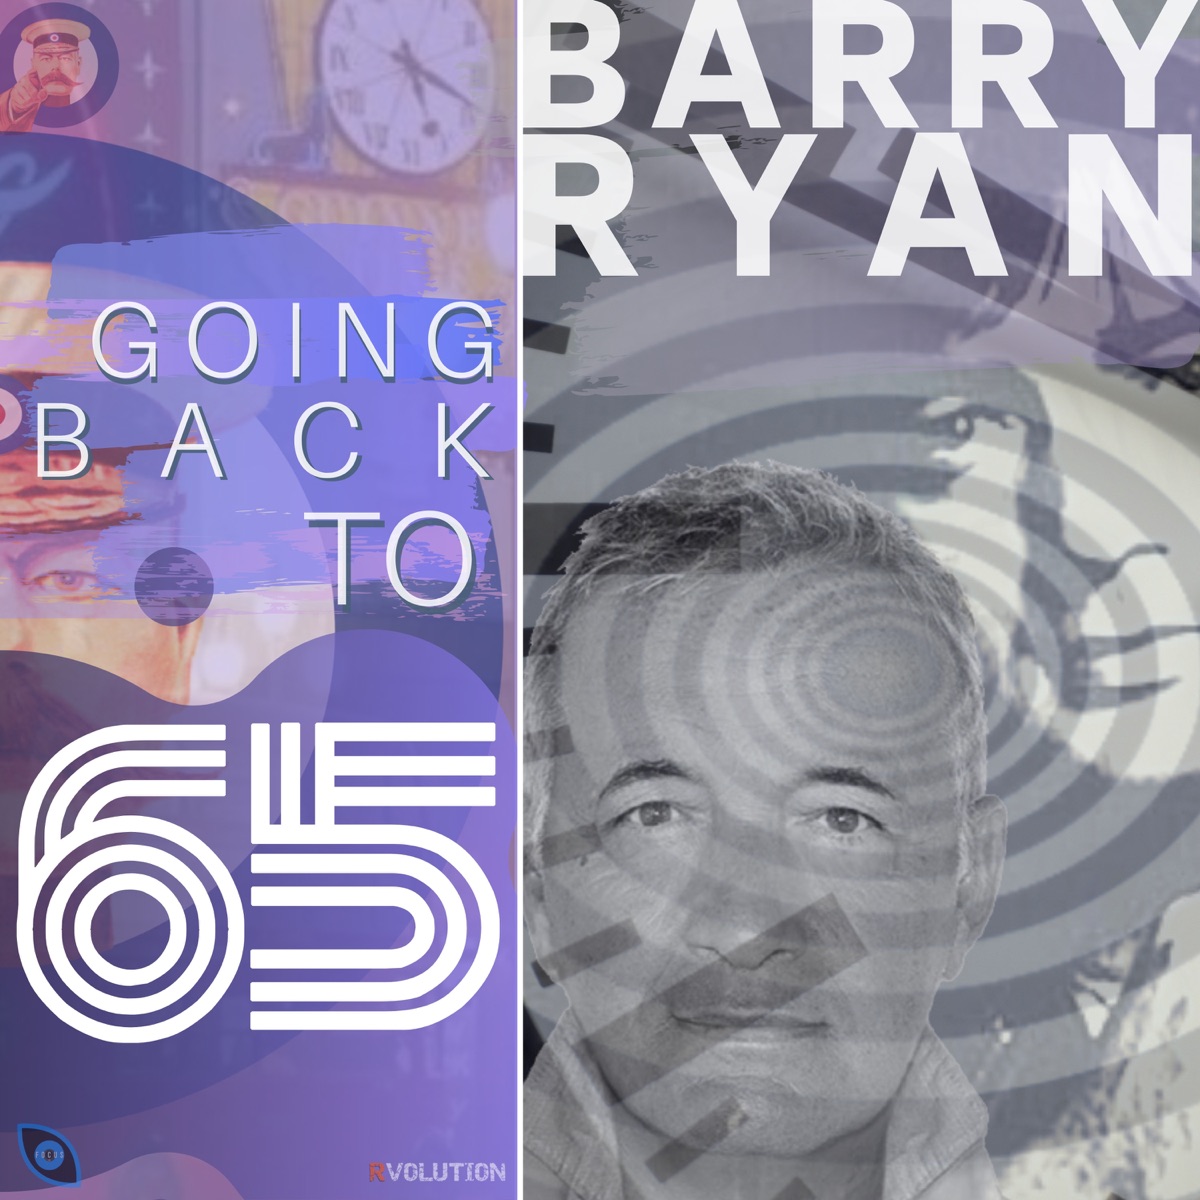 Going Back to 65 - Album by Barry Ryan - Apple Music